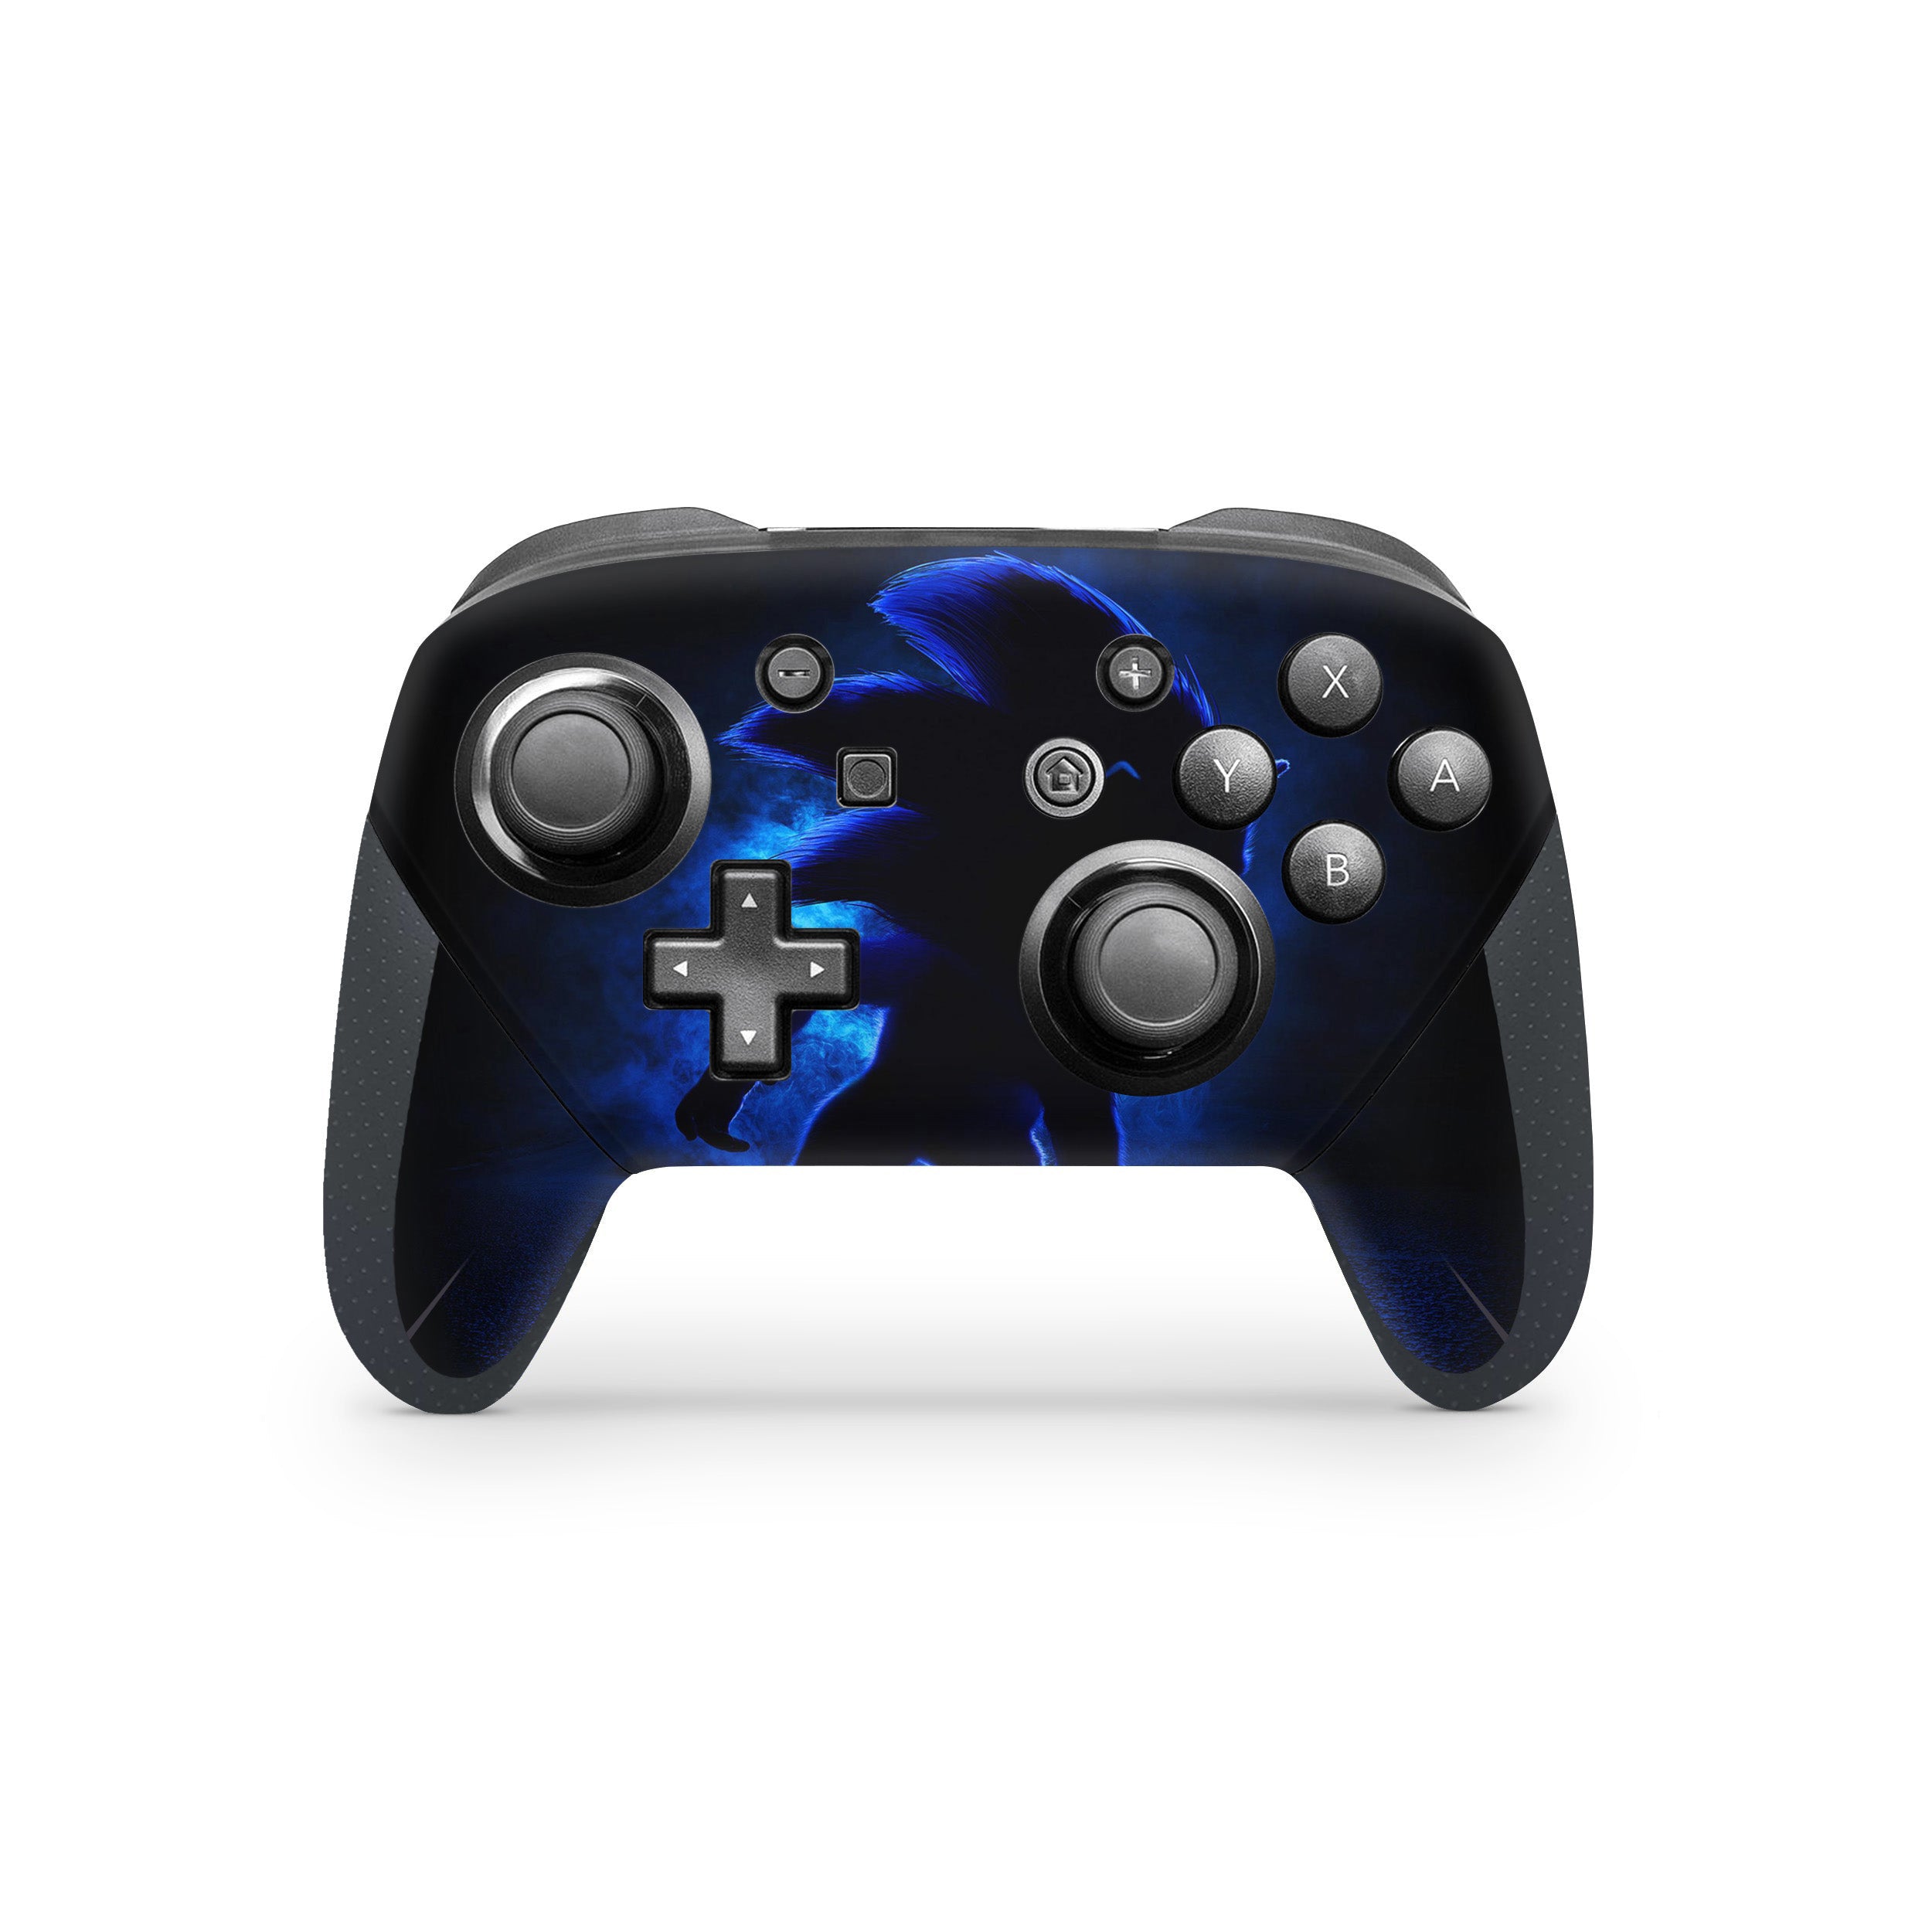 A video game skin featuring a Sonic The Hedgehog design for the Switch Pro Controller.